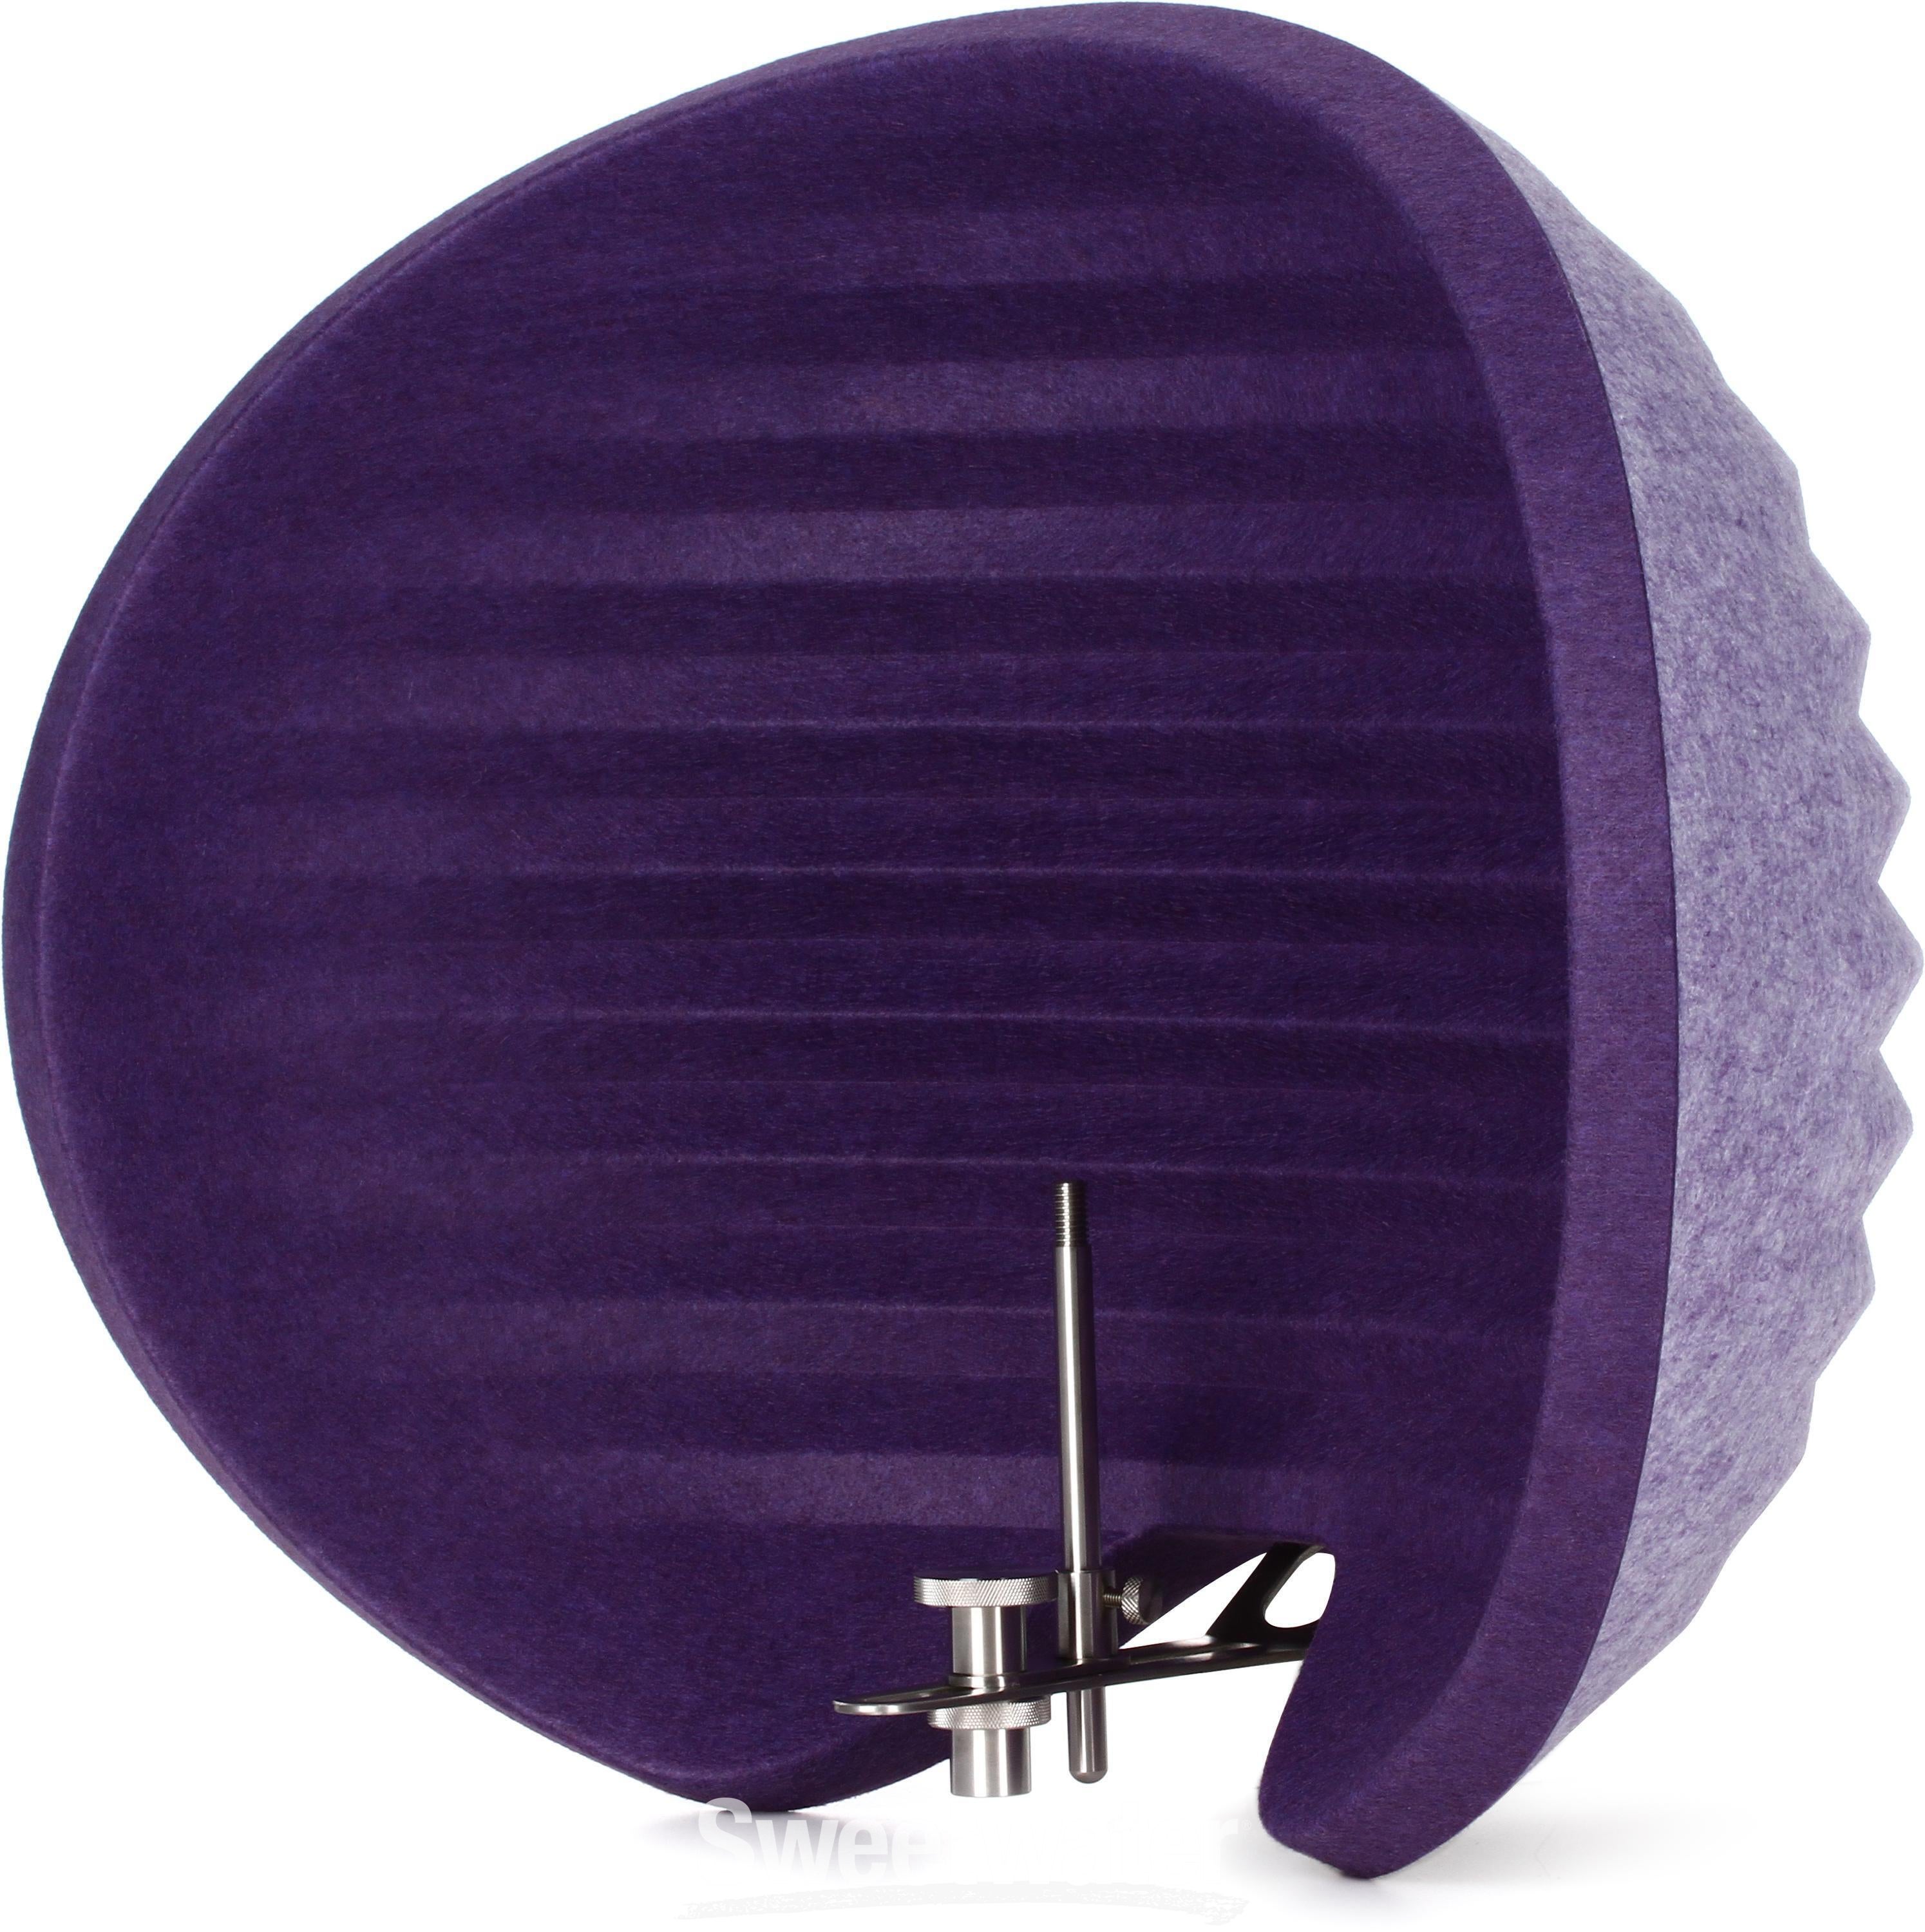 Aston Microphones Halo Portable Microphone Reflection Filter - Purple